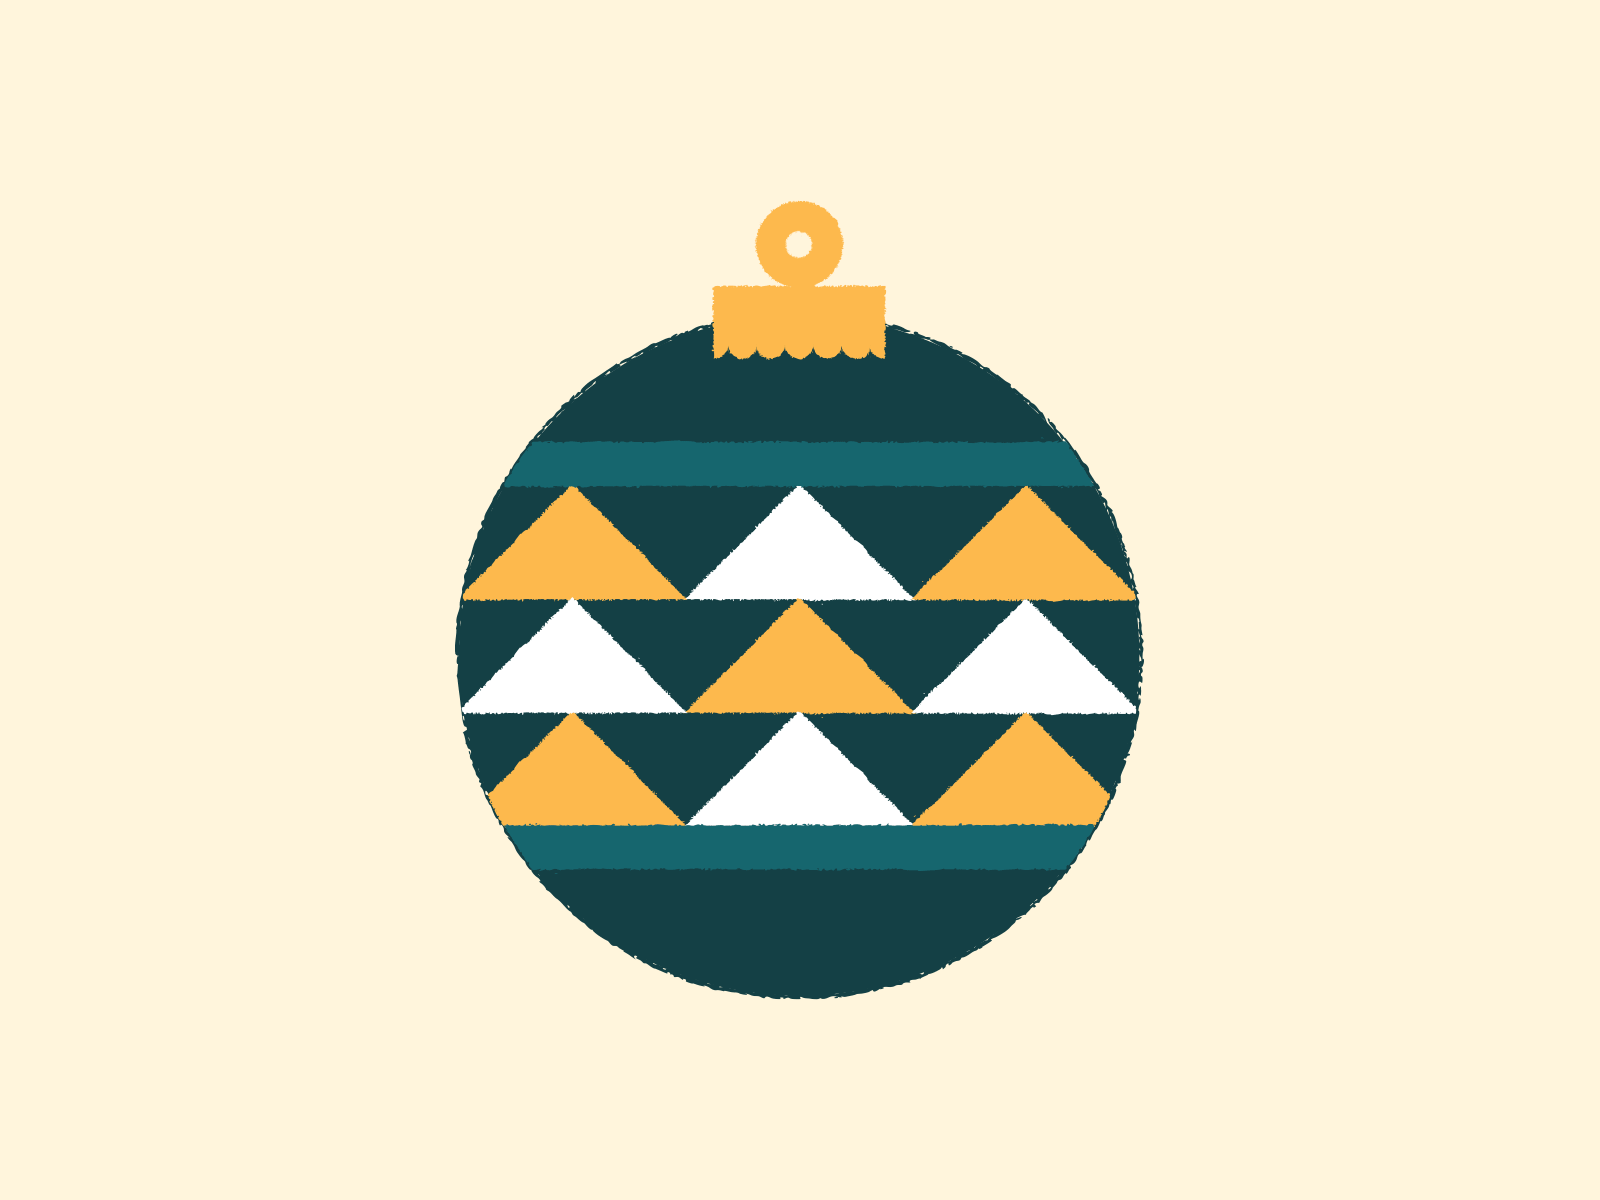 Christmas Ornaments by Zinegraph on Dribbble